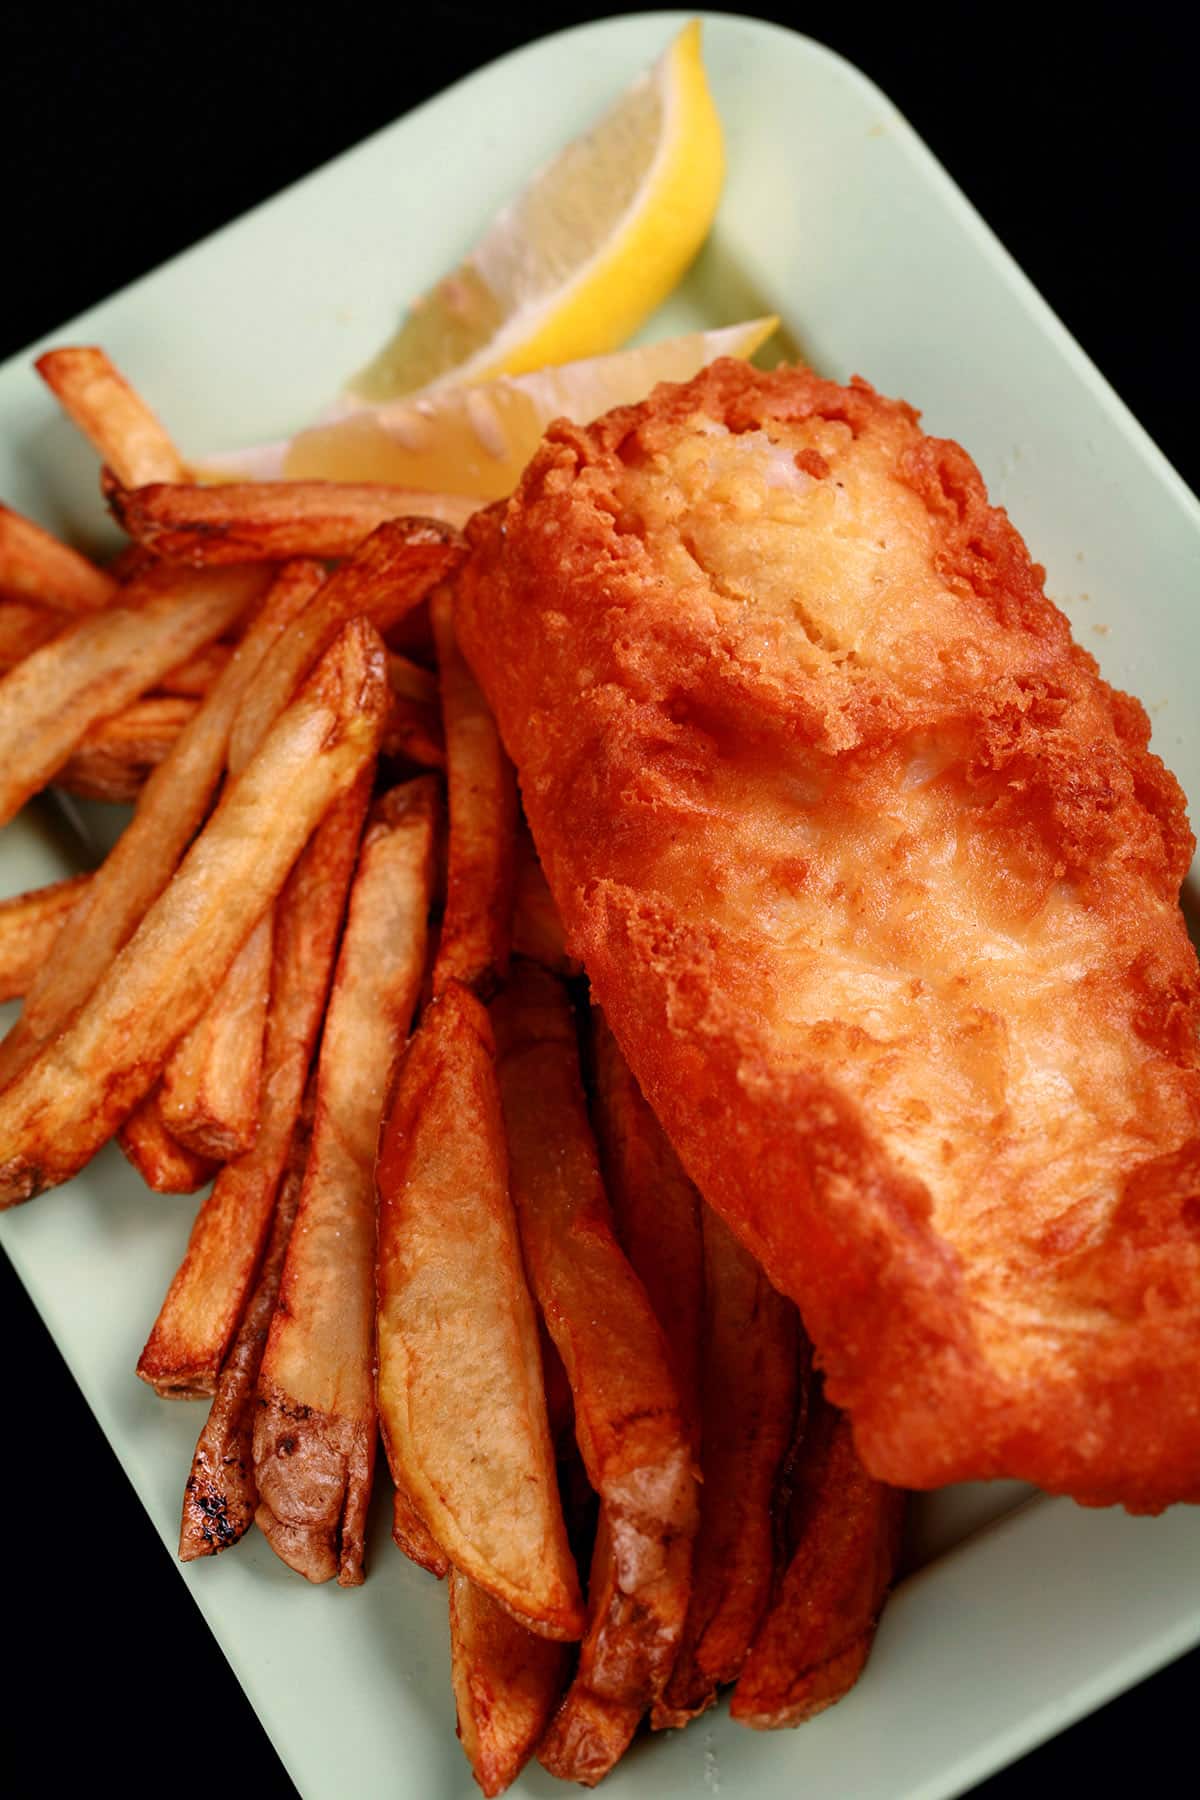 A plate of gluten-free fish and chips, with a wedge of lemon.